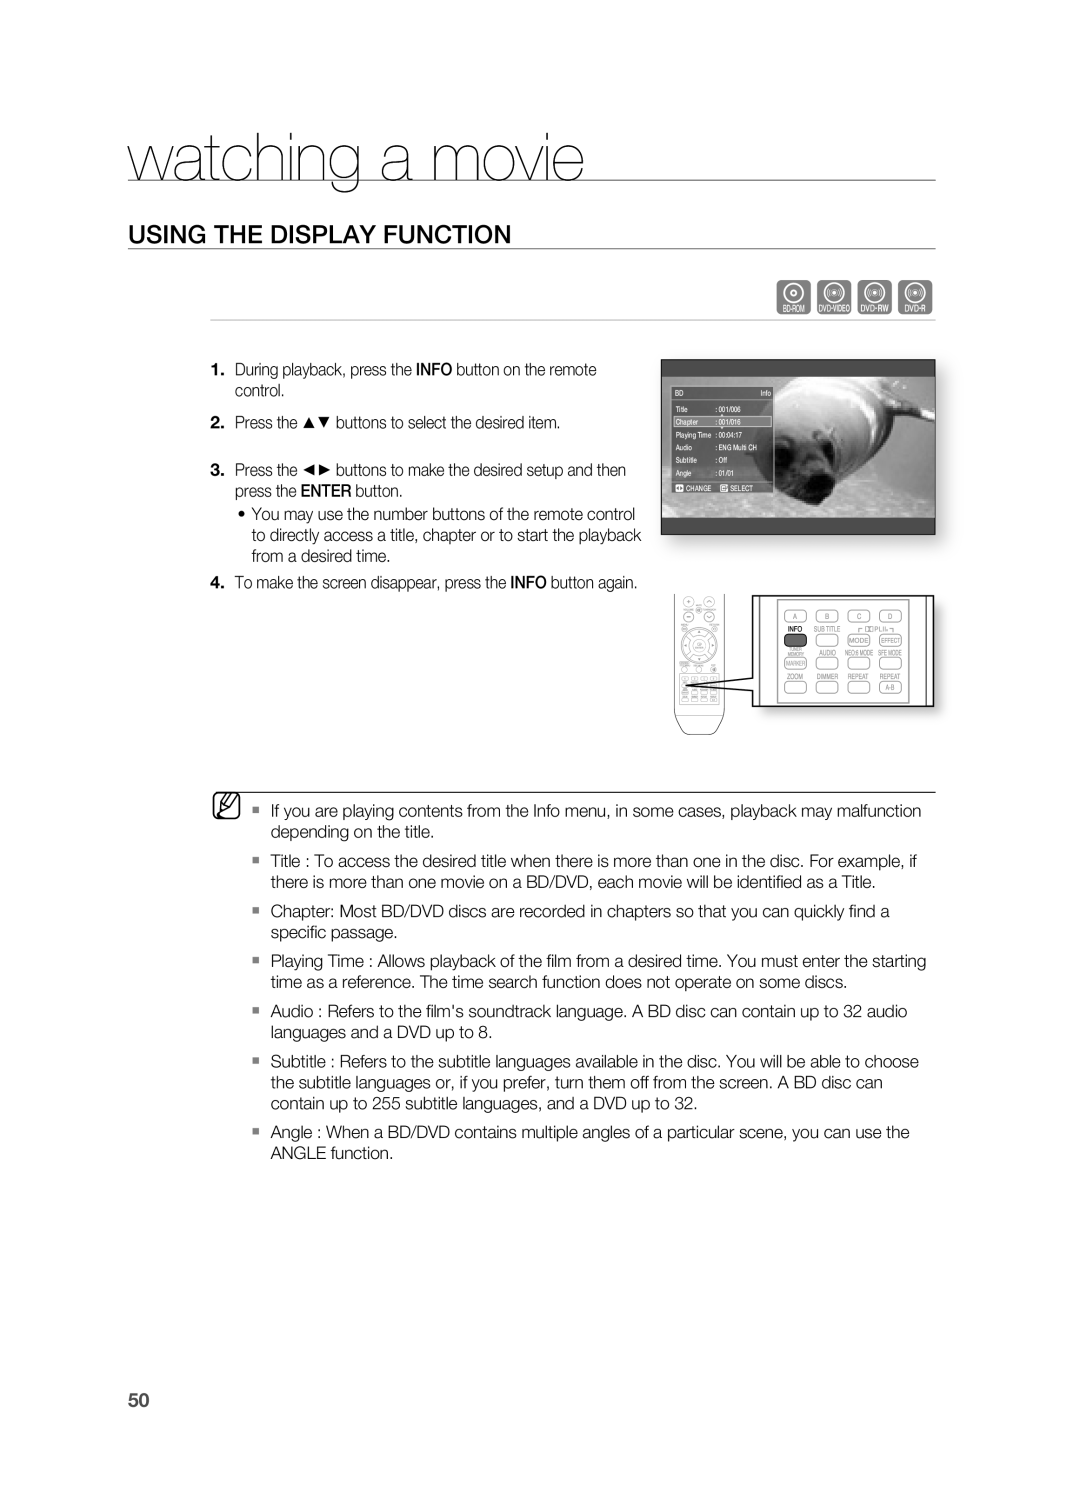 Samsung HT-BD2 manual watching a movie, Using The Display Function, hZCV 